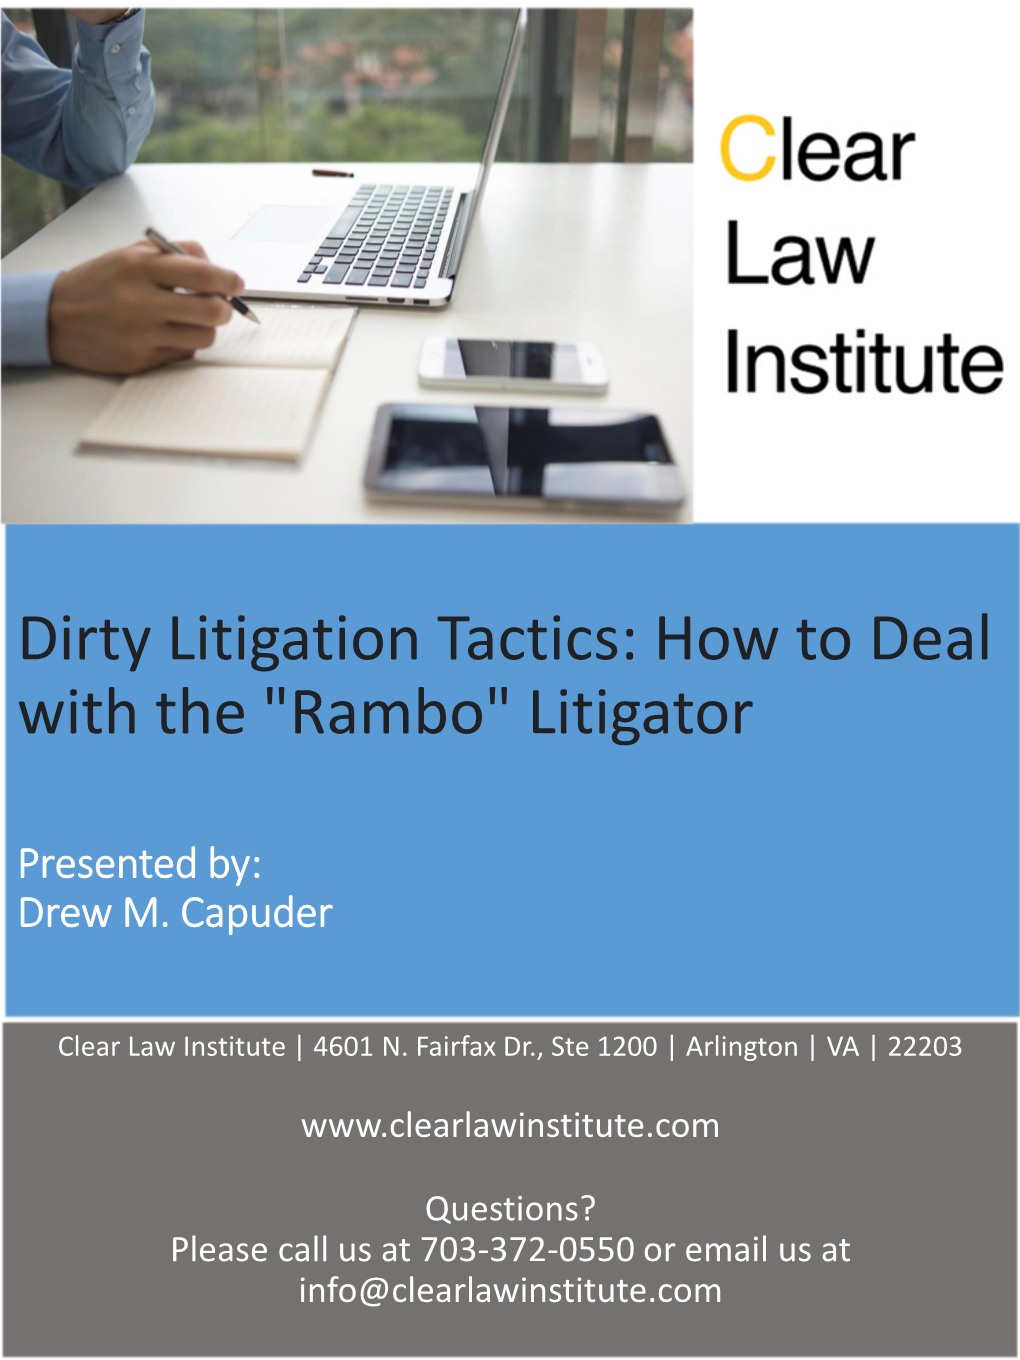 Dirty Litigation Tactics: How to Deal with the "Rambo" Litigator